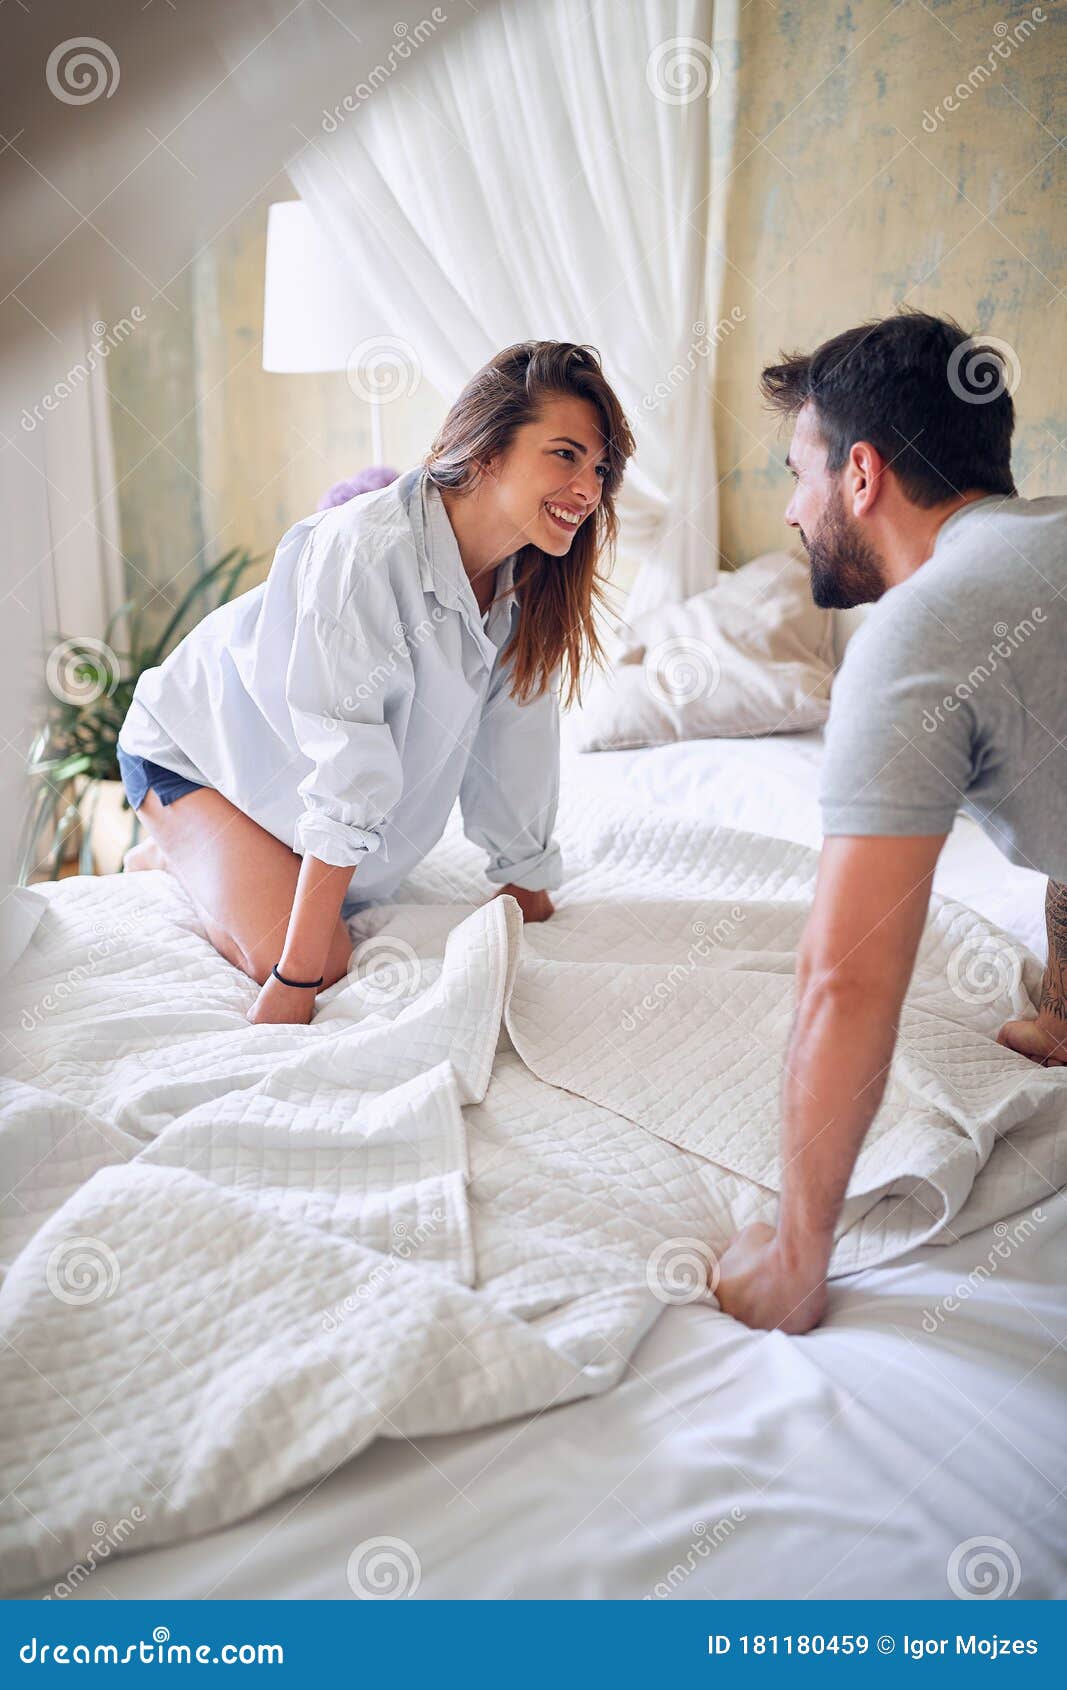 couple  enjoying intimate moment at morning in bed